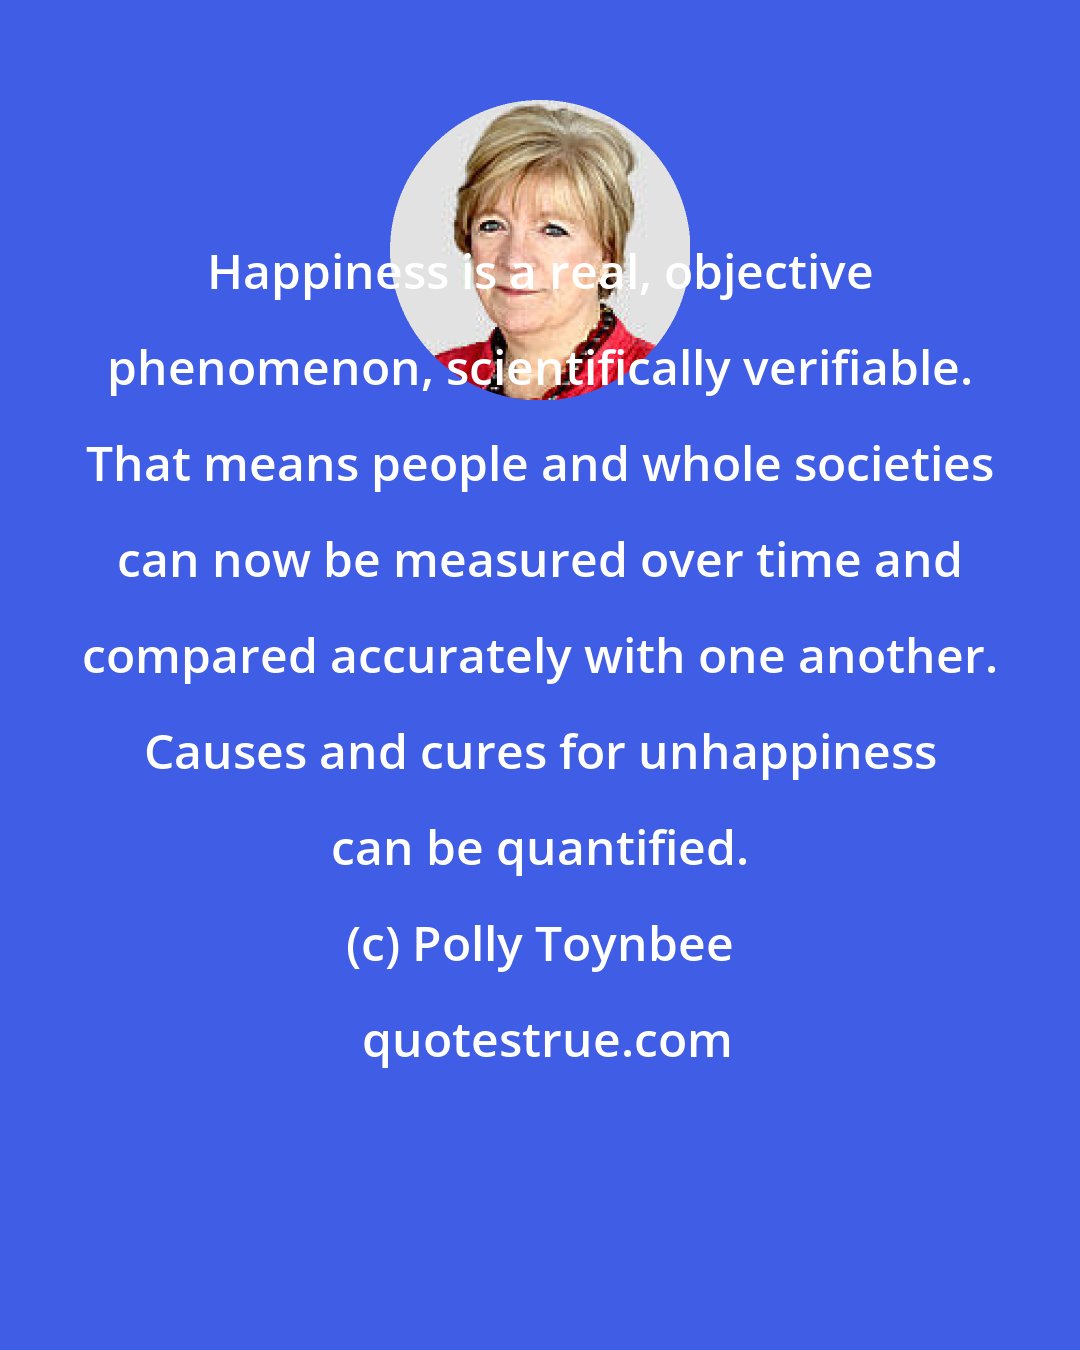 Polly Toynbee: Happiness is a real, objective phenomenon, scientifically verifiable. That means people and whole societies can now be measured over time and compared accurately with one another. Causes and cures for unhappiness can be quantified.